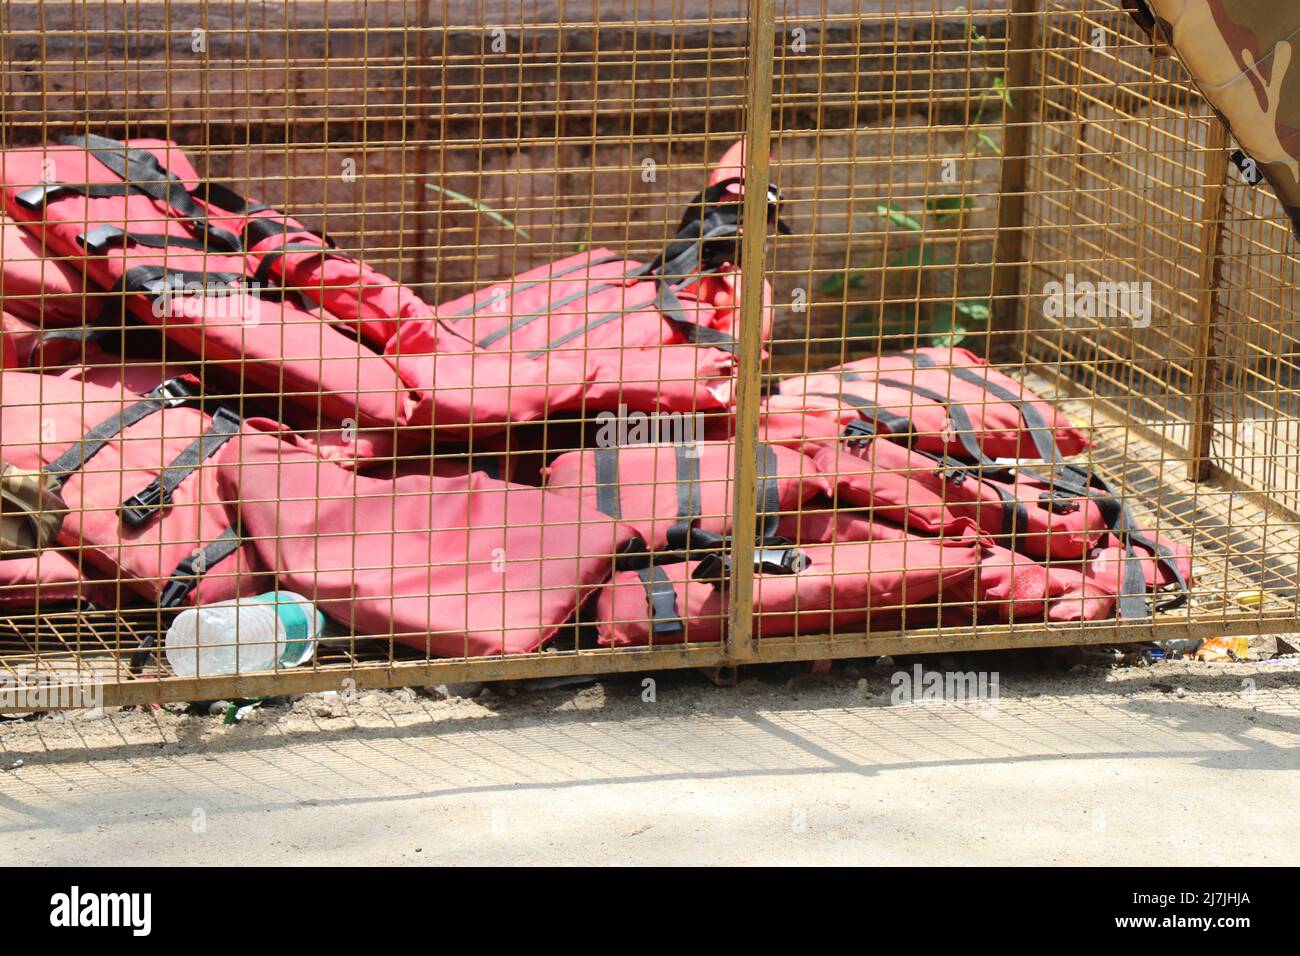 Life jackets in red color kept inside a metal netted container important for protecting life in sea or ocean or water sources Stock Photo